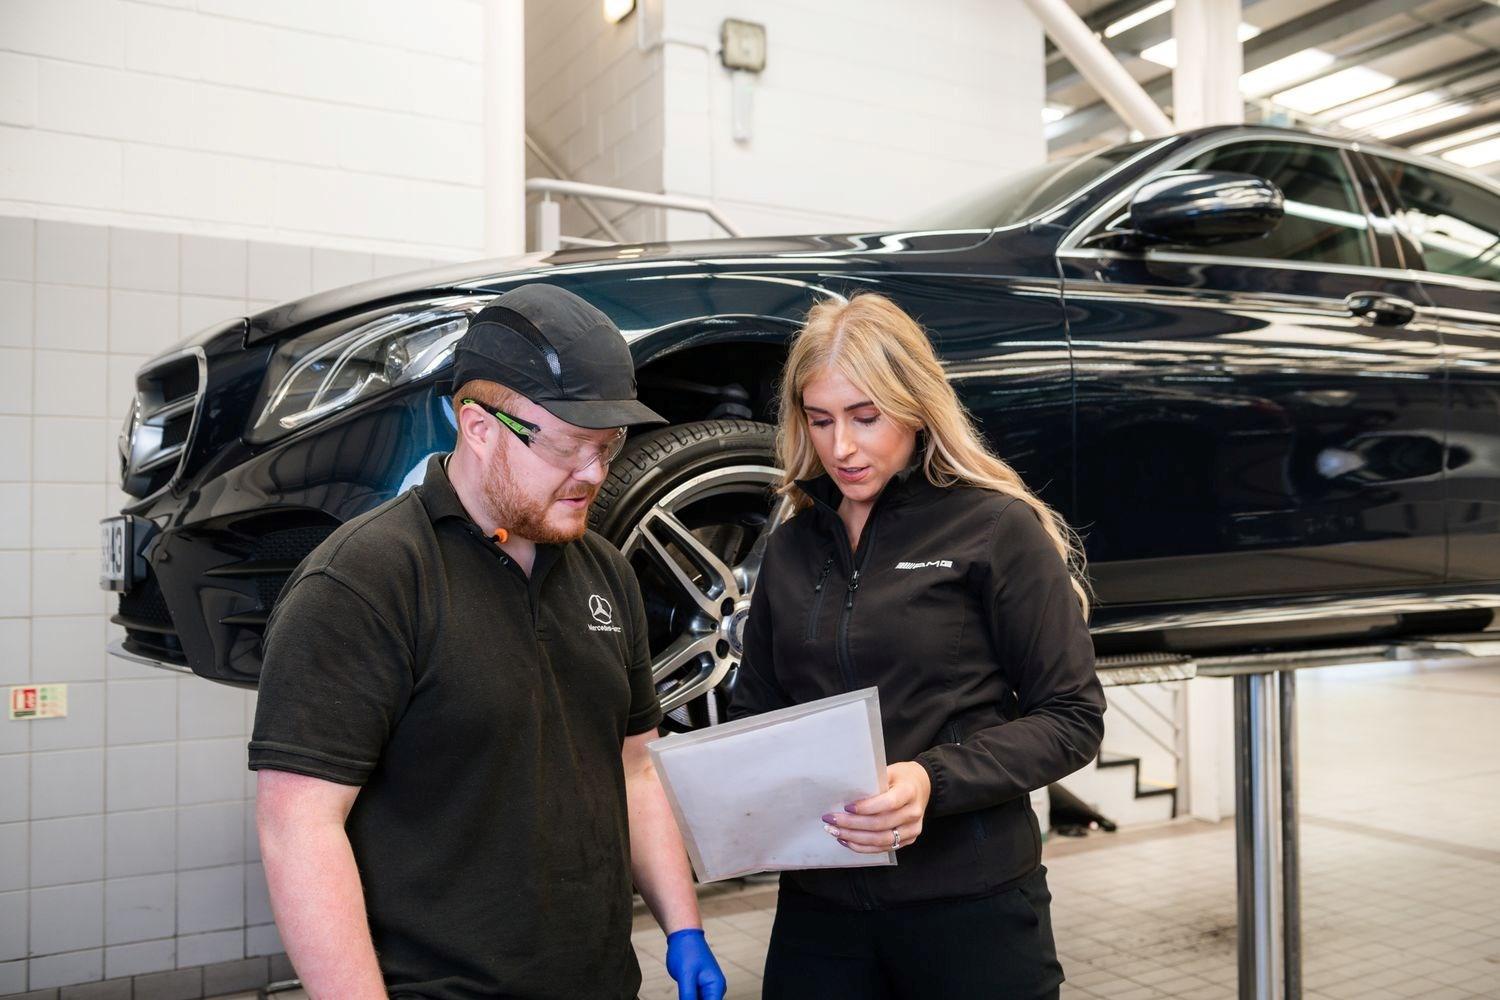 Mercedes-Benz Technicians discuss the list of items that need to be completed during routine maintenance at Mercedes-Benz of Portadown Repair Centre